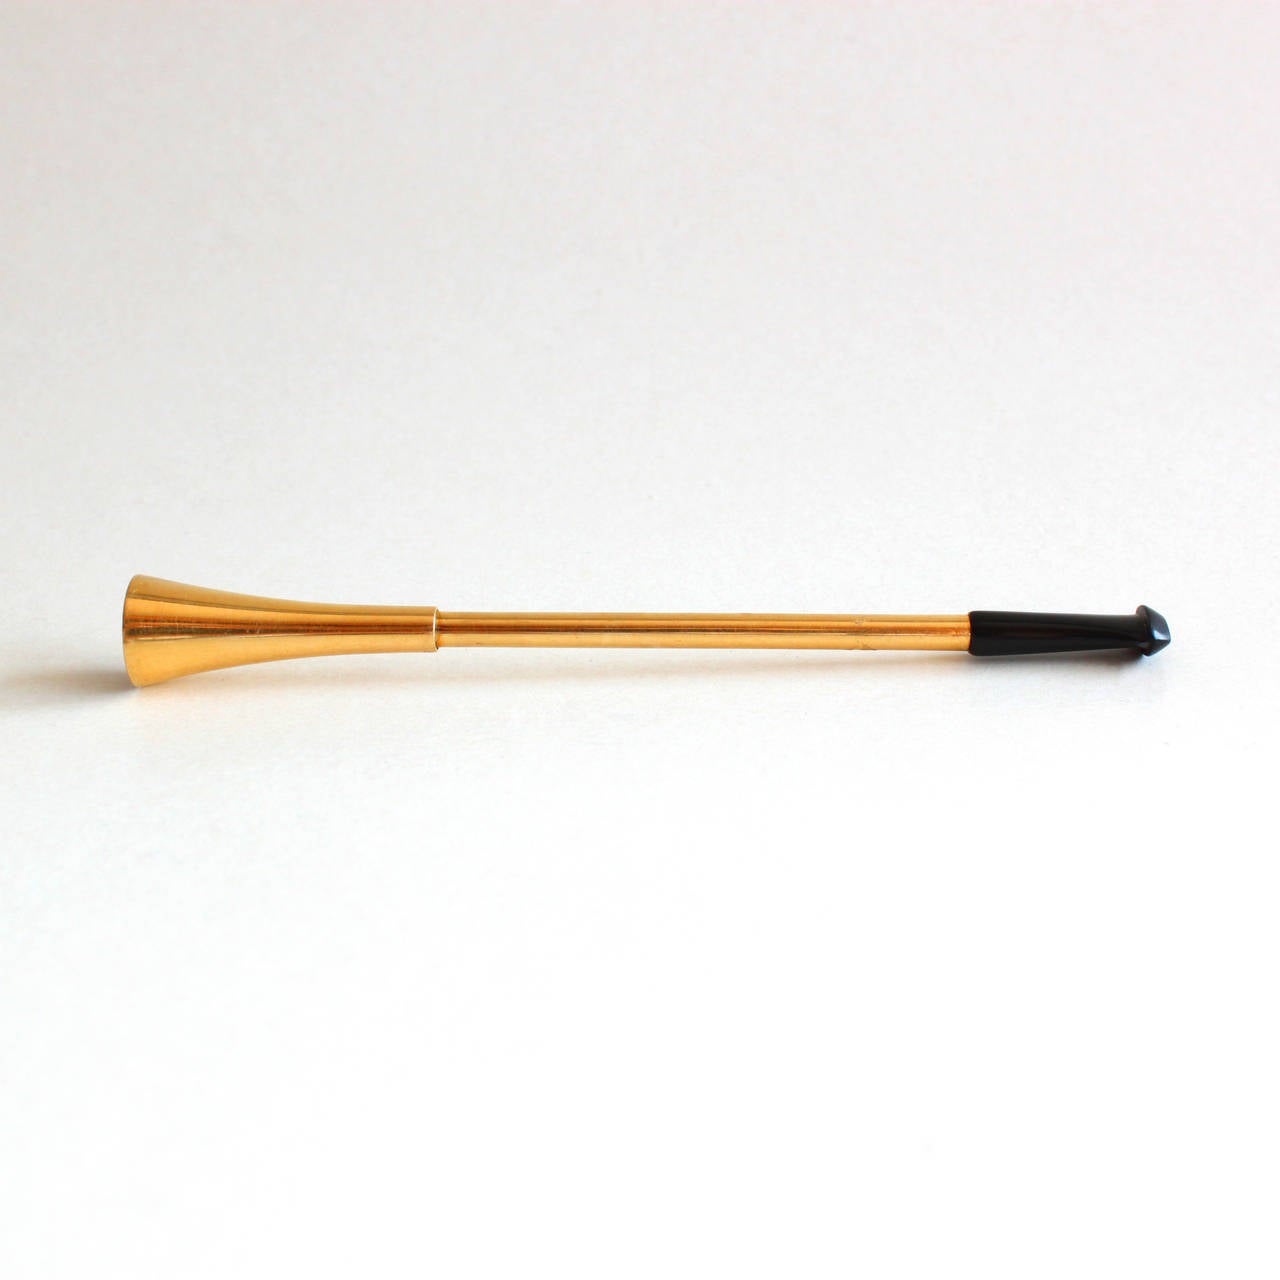 A sleek Art Deco Cartier 18k gold cigarette holder in the shape of a trompete, ending with an onyx mouthpiece. The end of the cigarette holder has a spring to easily mount a cigarette.

Signed, numbered and hallmarked. Cartier Paris 1930s.